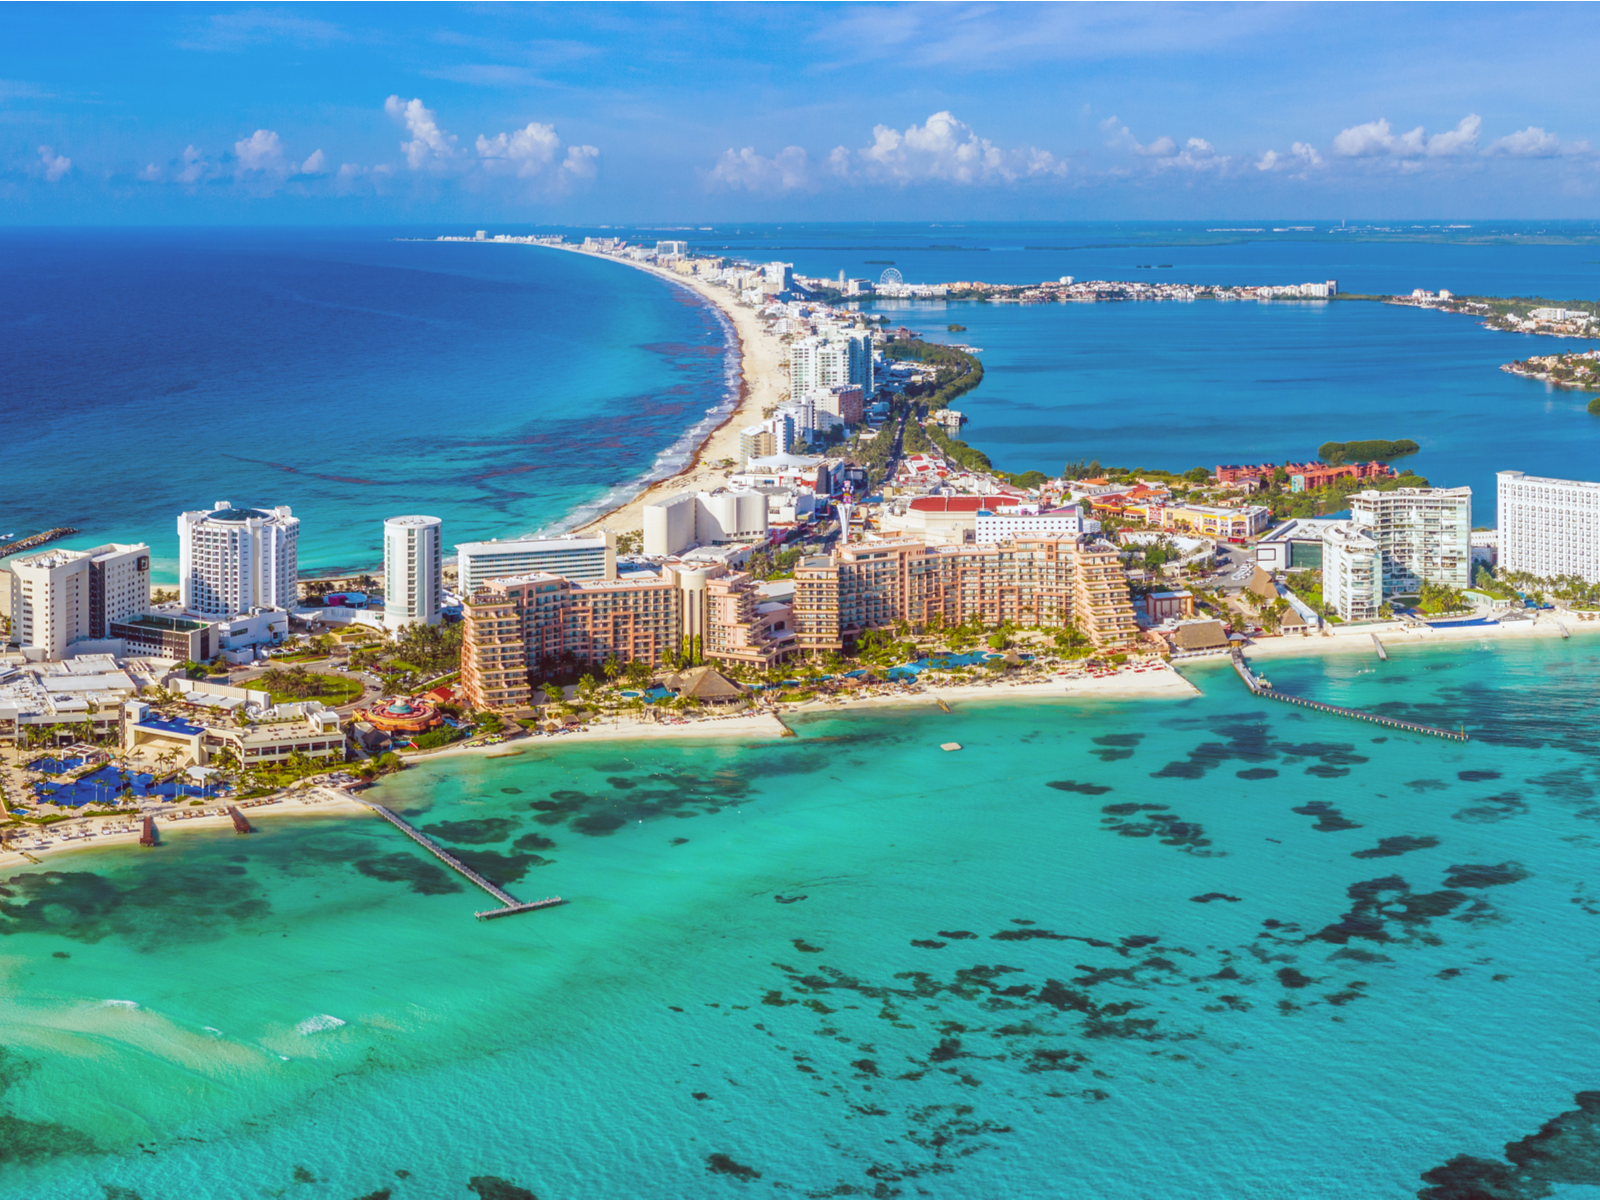 Aerial view on the luxurious emerald waters at Grand Fiesta Americana Coral Beach and its grand buildings, considered as one of the best all-inclusive resorts in Cancun for families